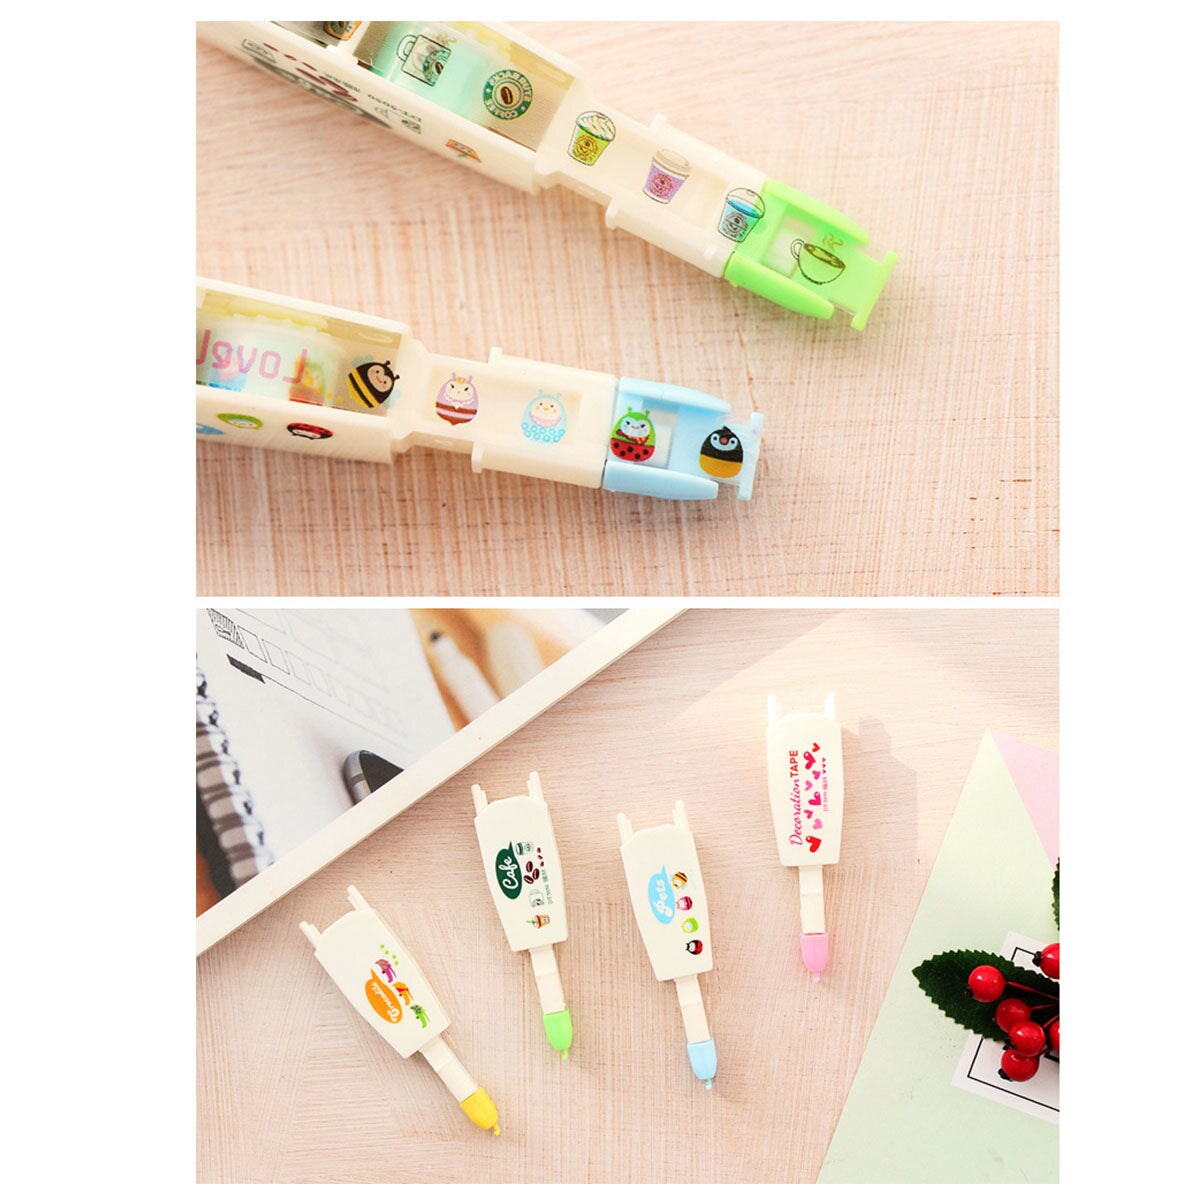 Wrapables Novelty Sticker Machine Pens, Decorative Stationery Supplies for  Home Office School, Galaxy 